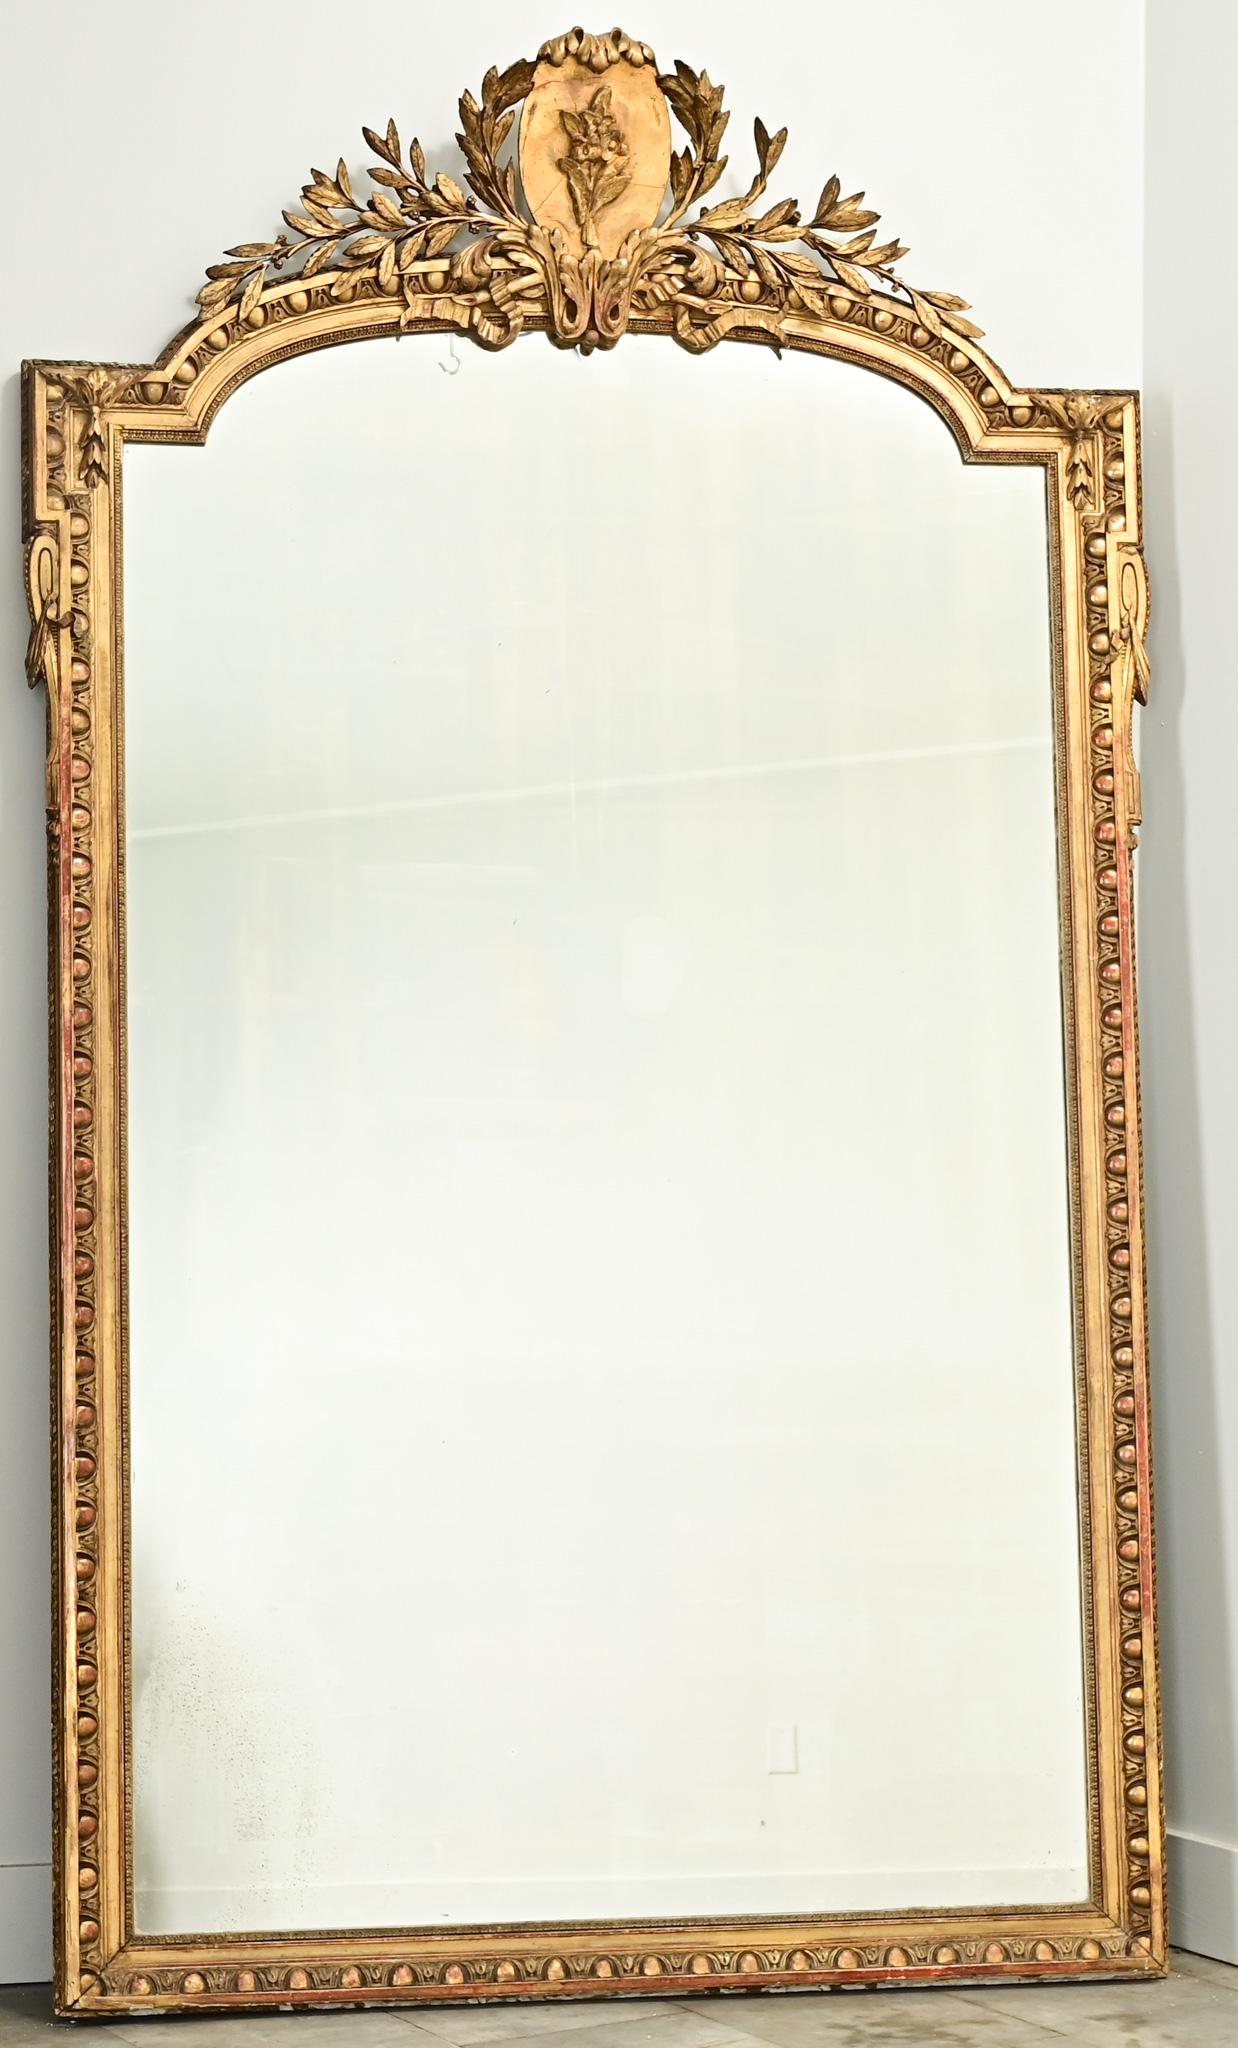 A large French Louis XVI gold gilt mirror made in 18th Century France. The mirror has a carved plaster crest with a center floral cartouche and laurel leaf branches. The center top of the frame is rounded with square corners and embellished with egg